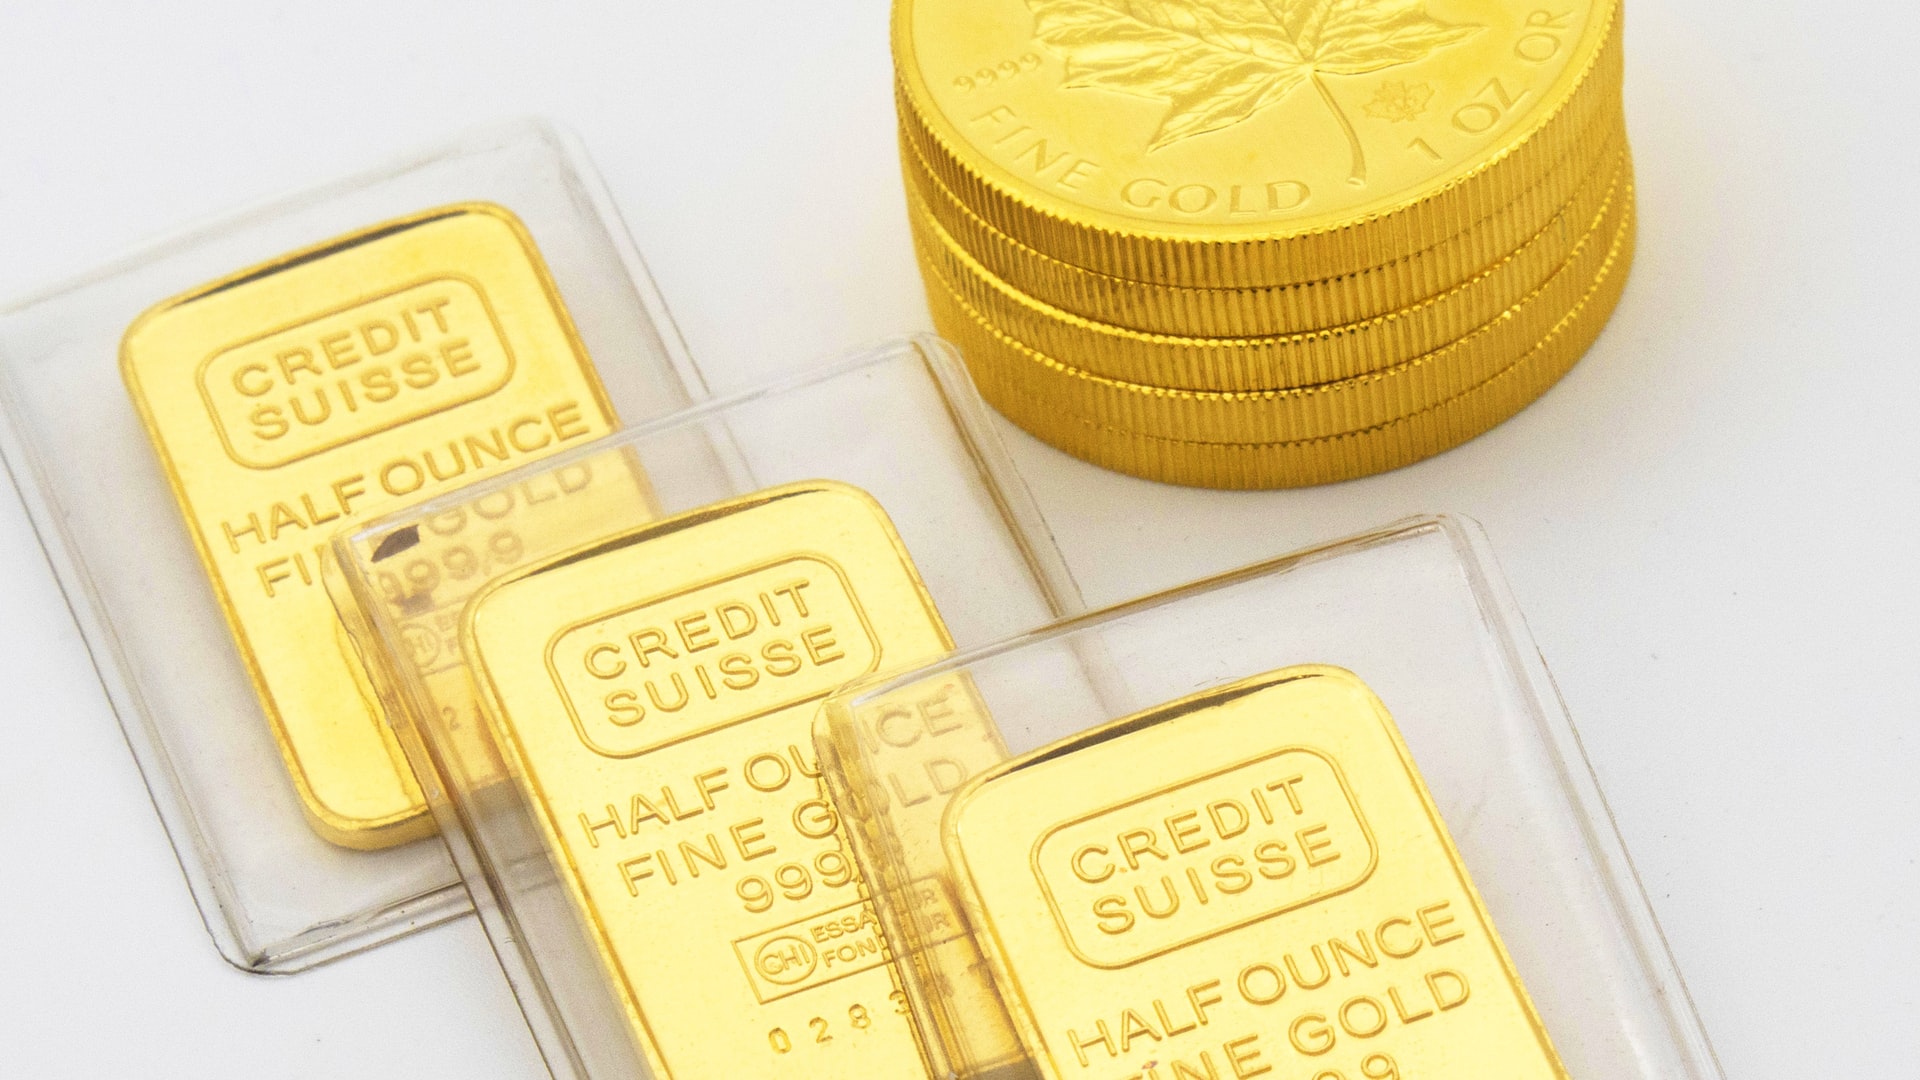 Should You Buy Or Sell Gold?